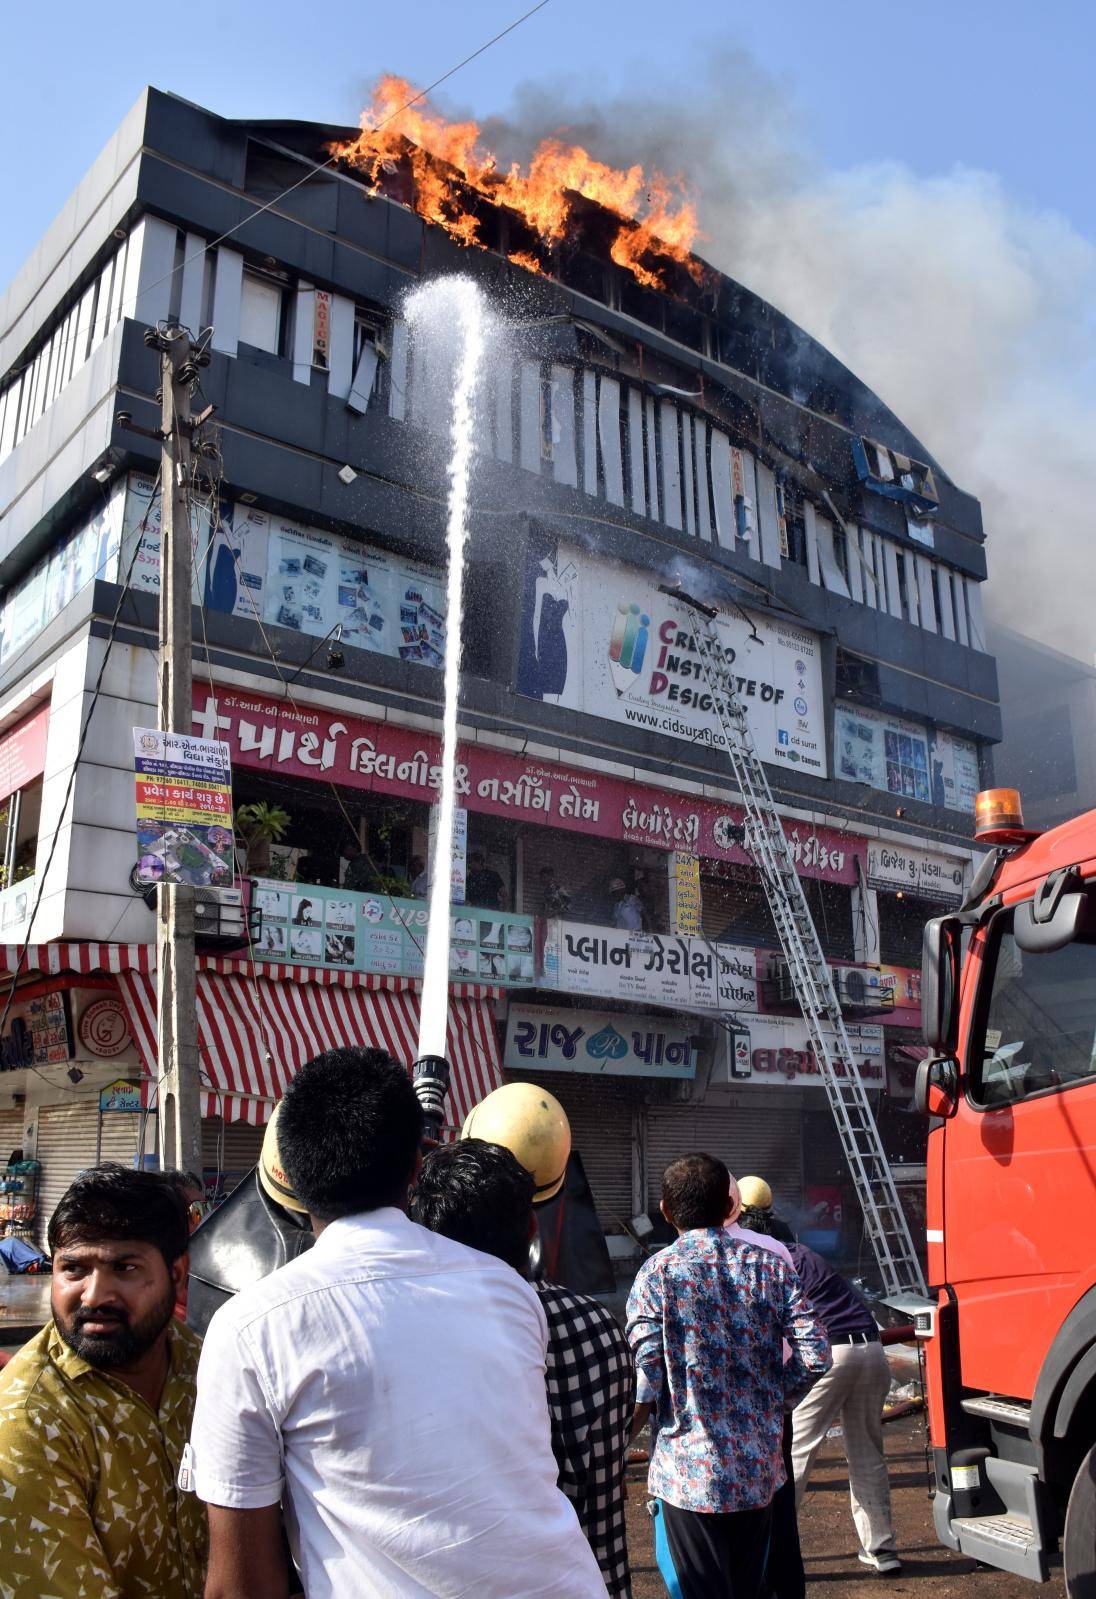 Firefighters douse a fire that broke out in a four-story commercial building in Surat